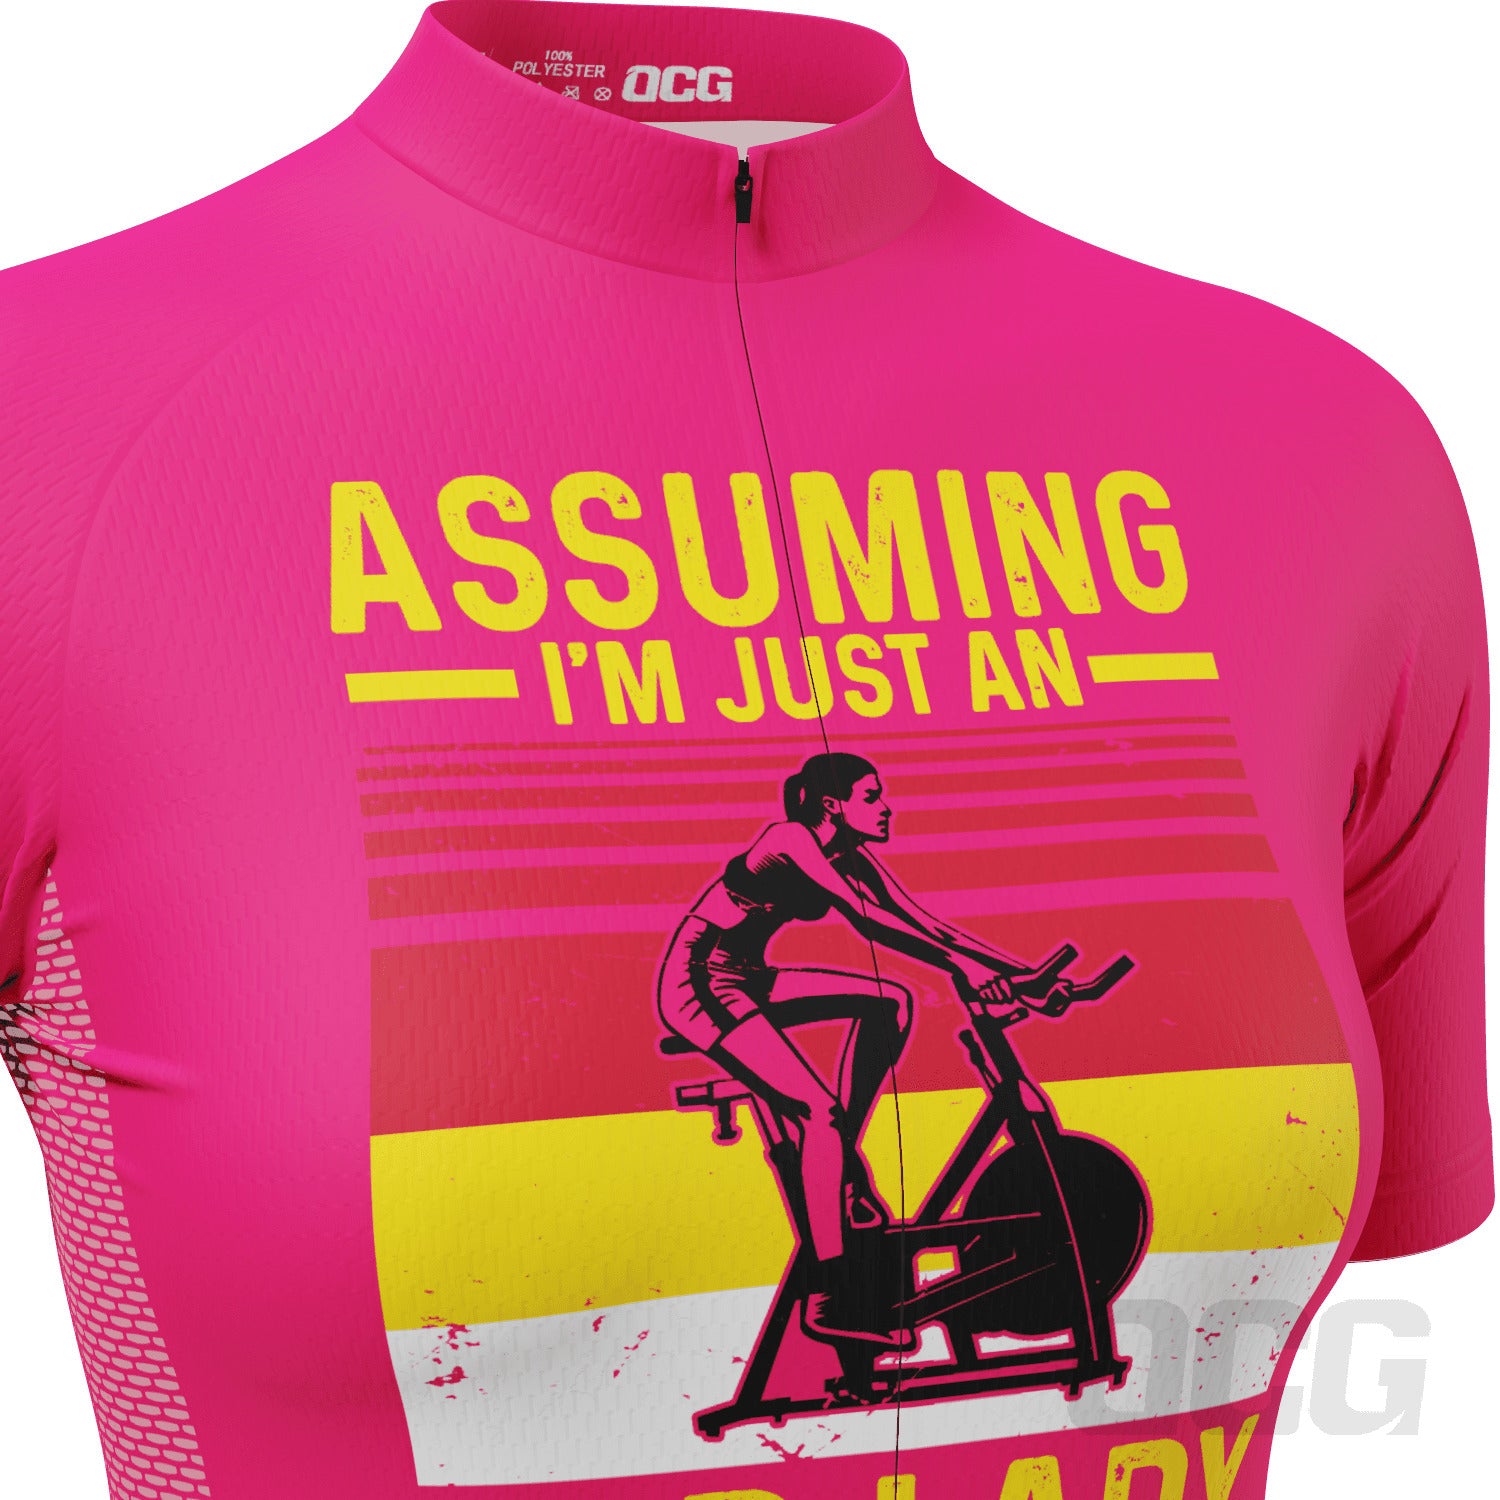 Women's Old Lady Mistake Short Sleeve Cycling Jersey